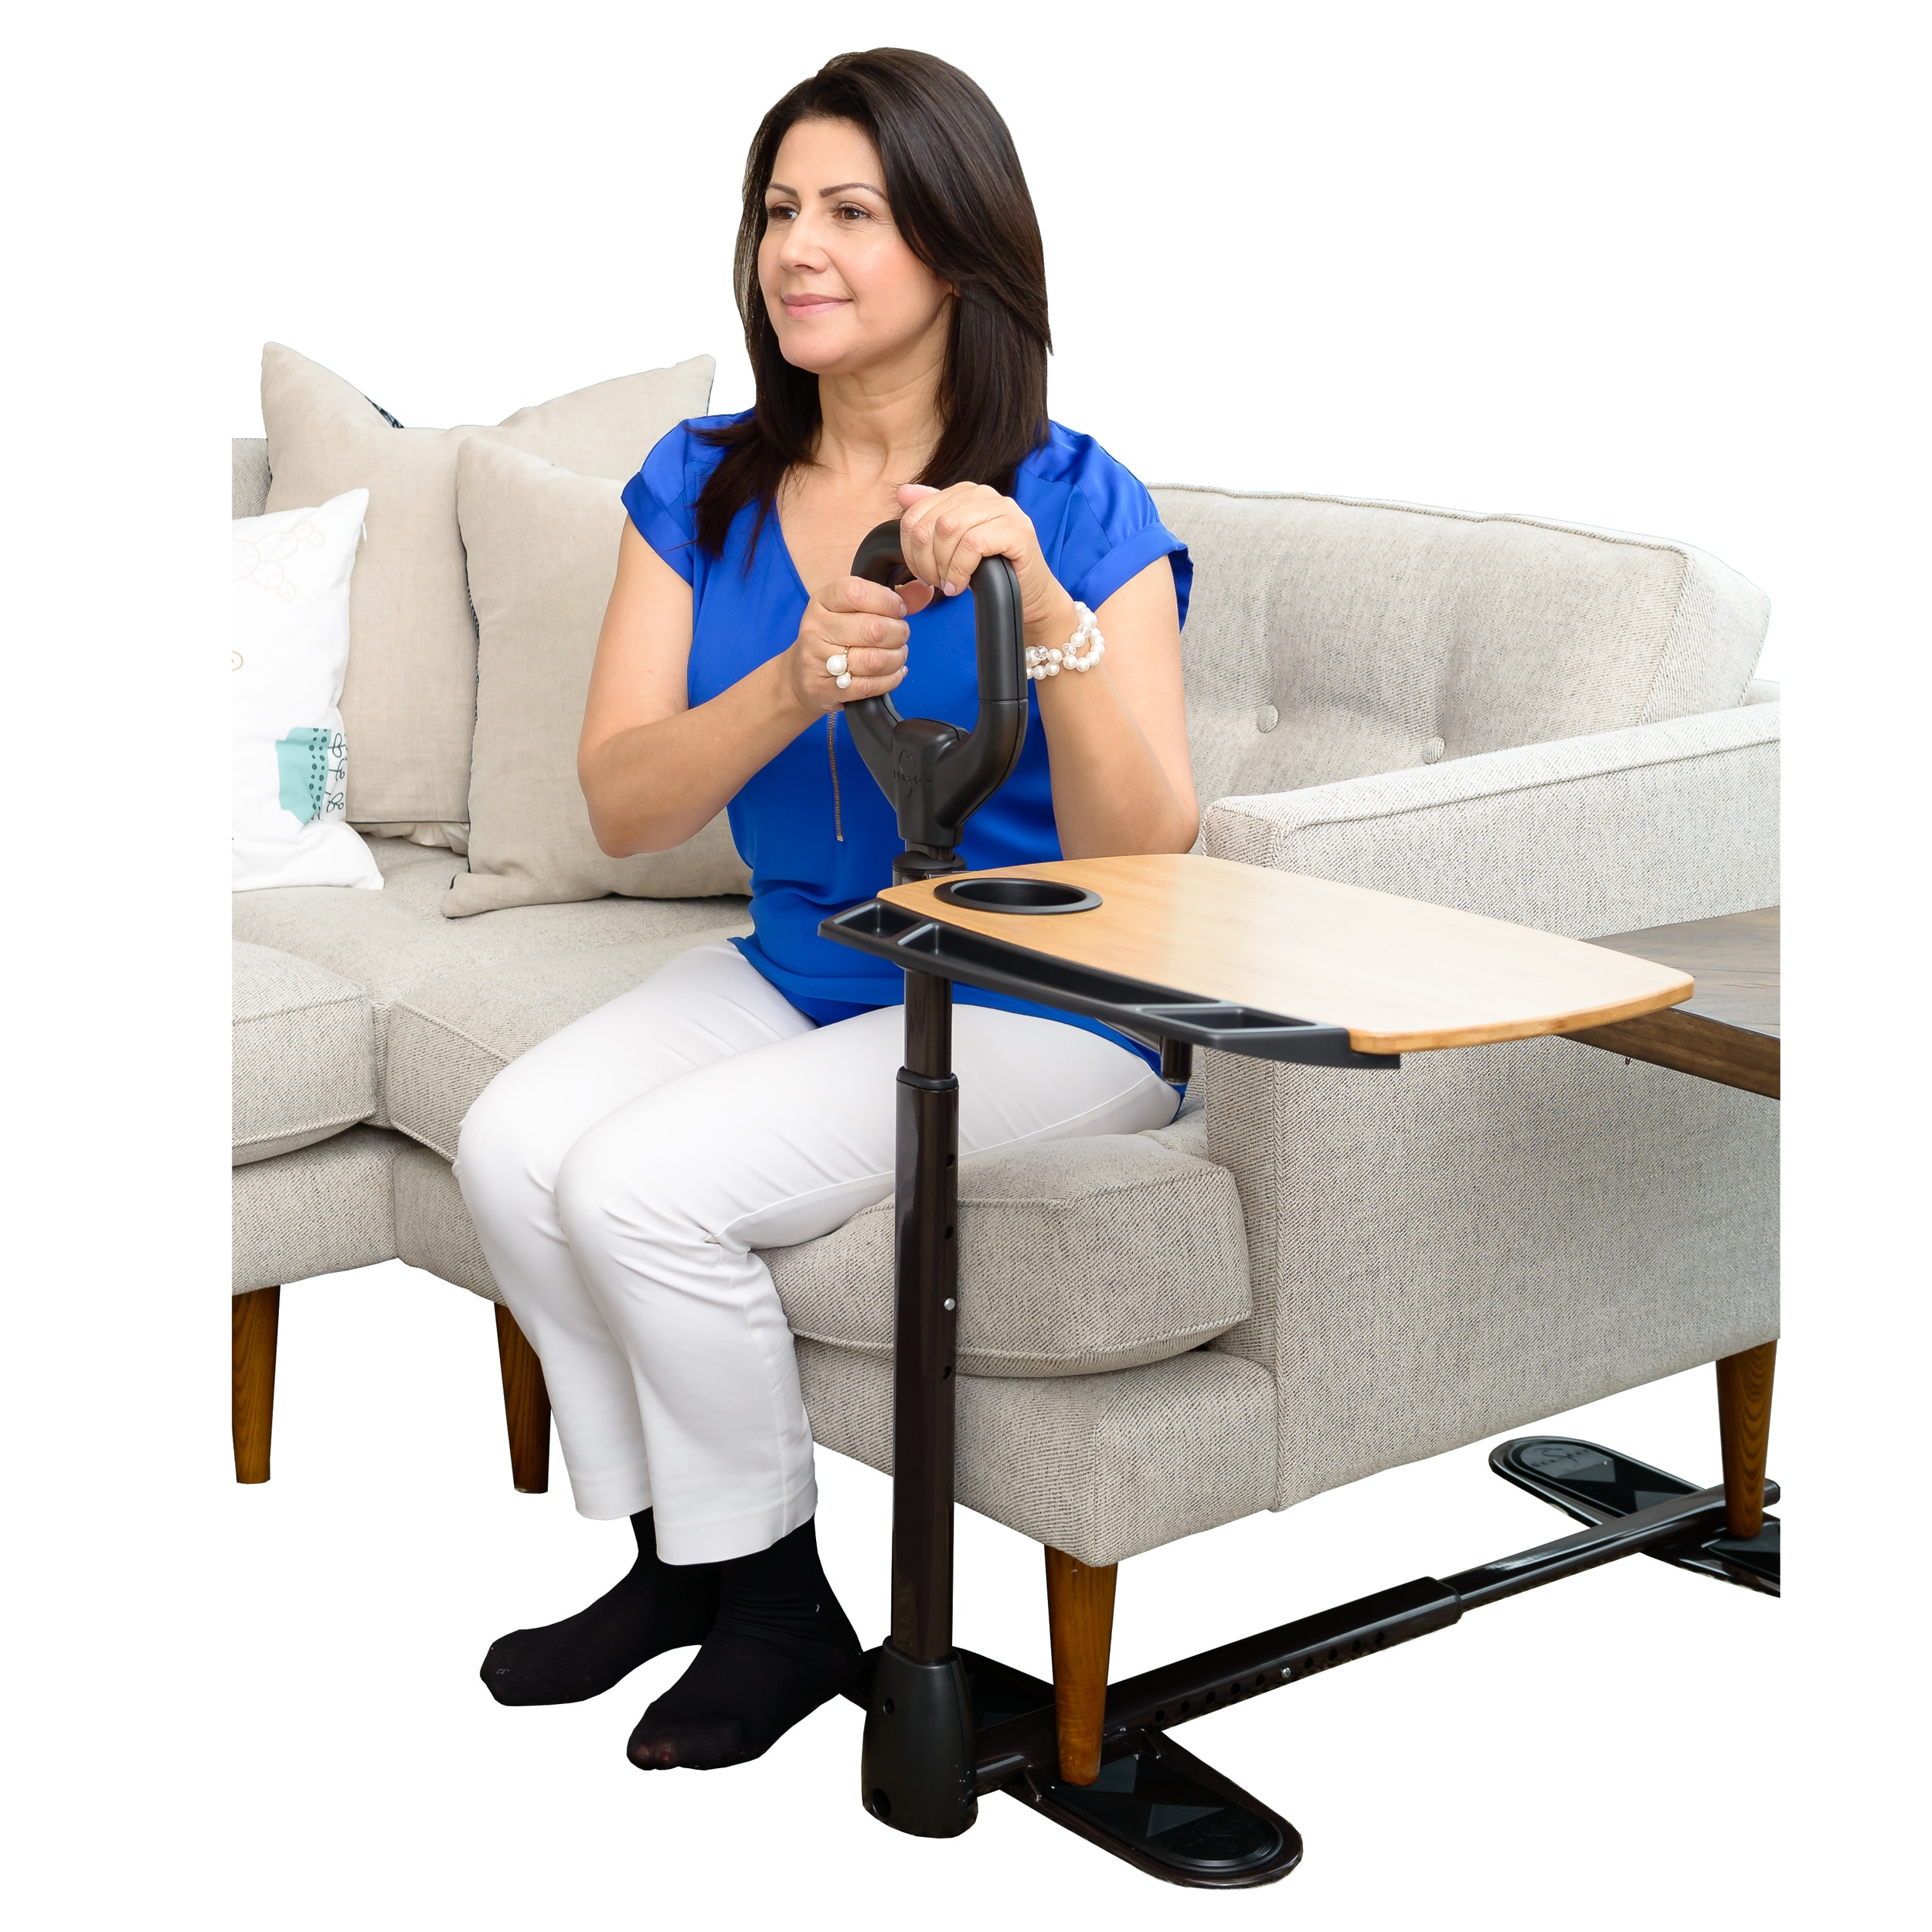 CHAIR/COUCH/BED CANE: Assist IN/OUT SAFELY, ADJUSTABLE, STURDY - household  items - by owner - housewares sale 